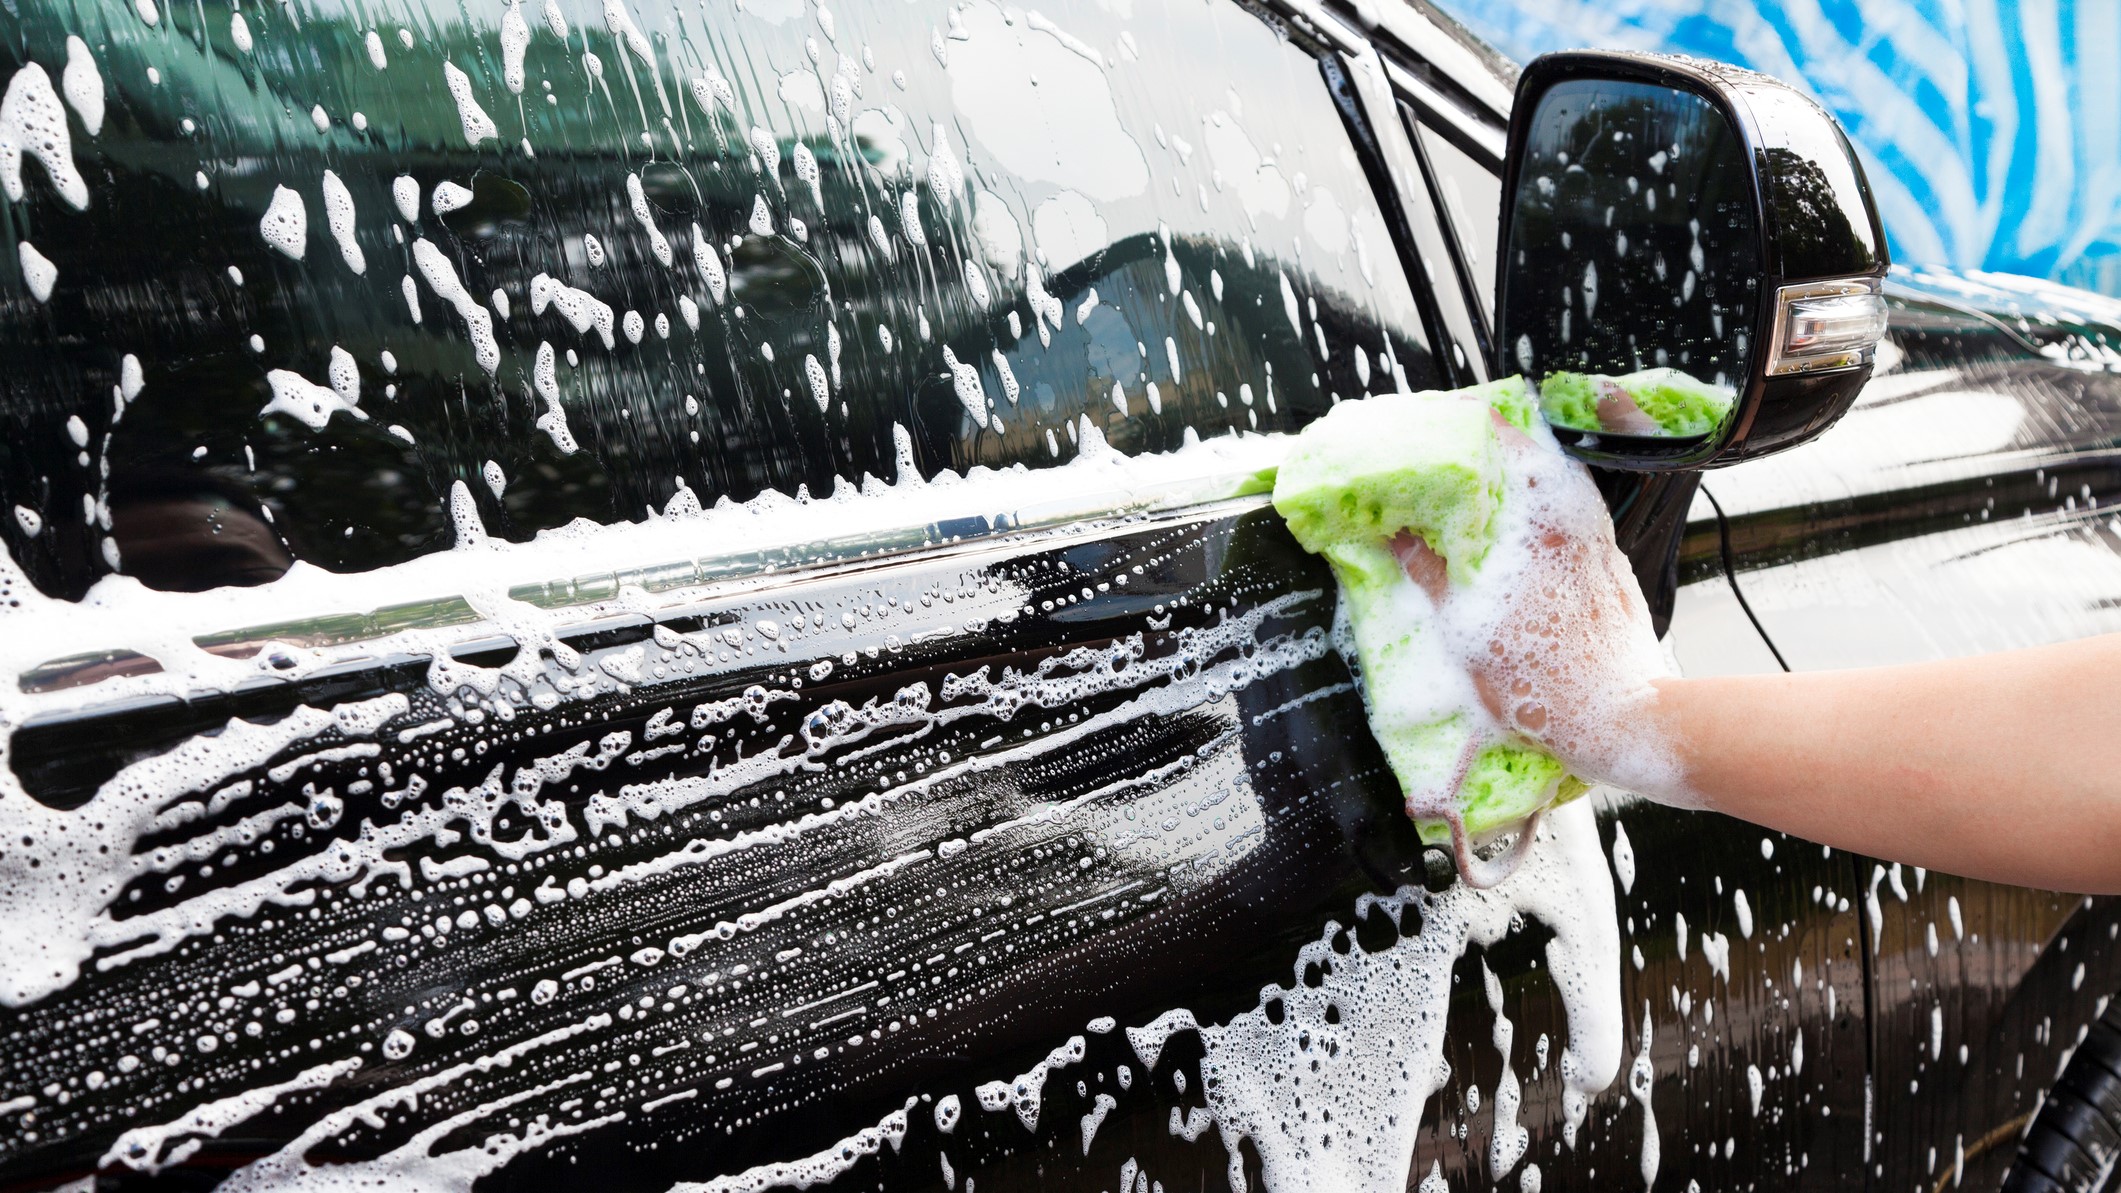 Car cleaning